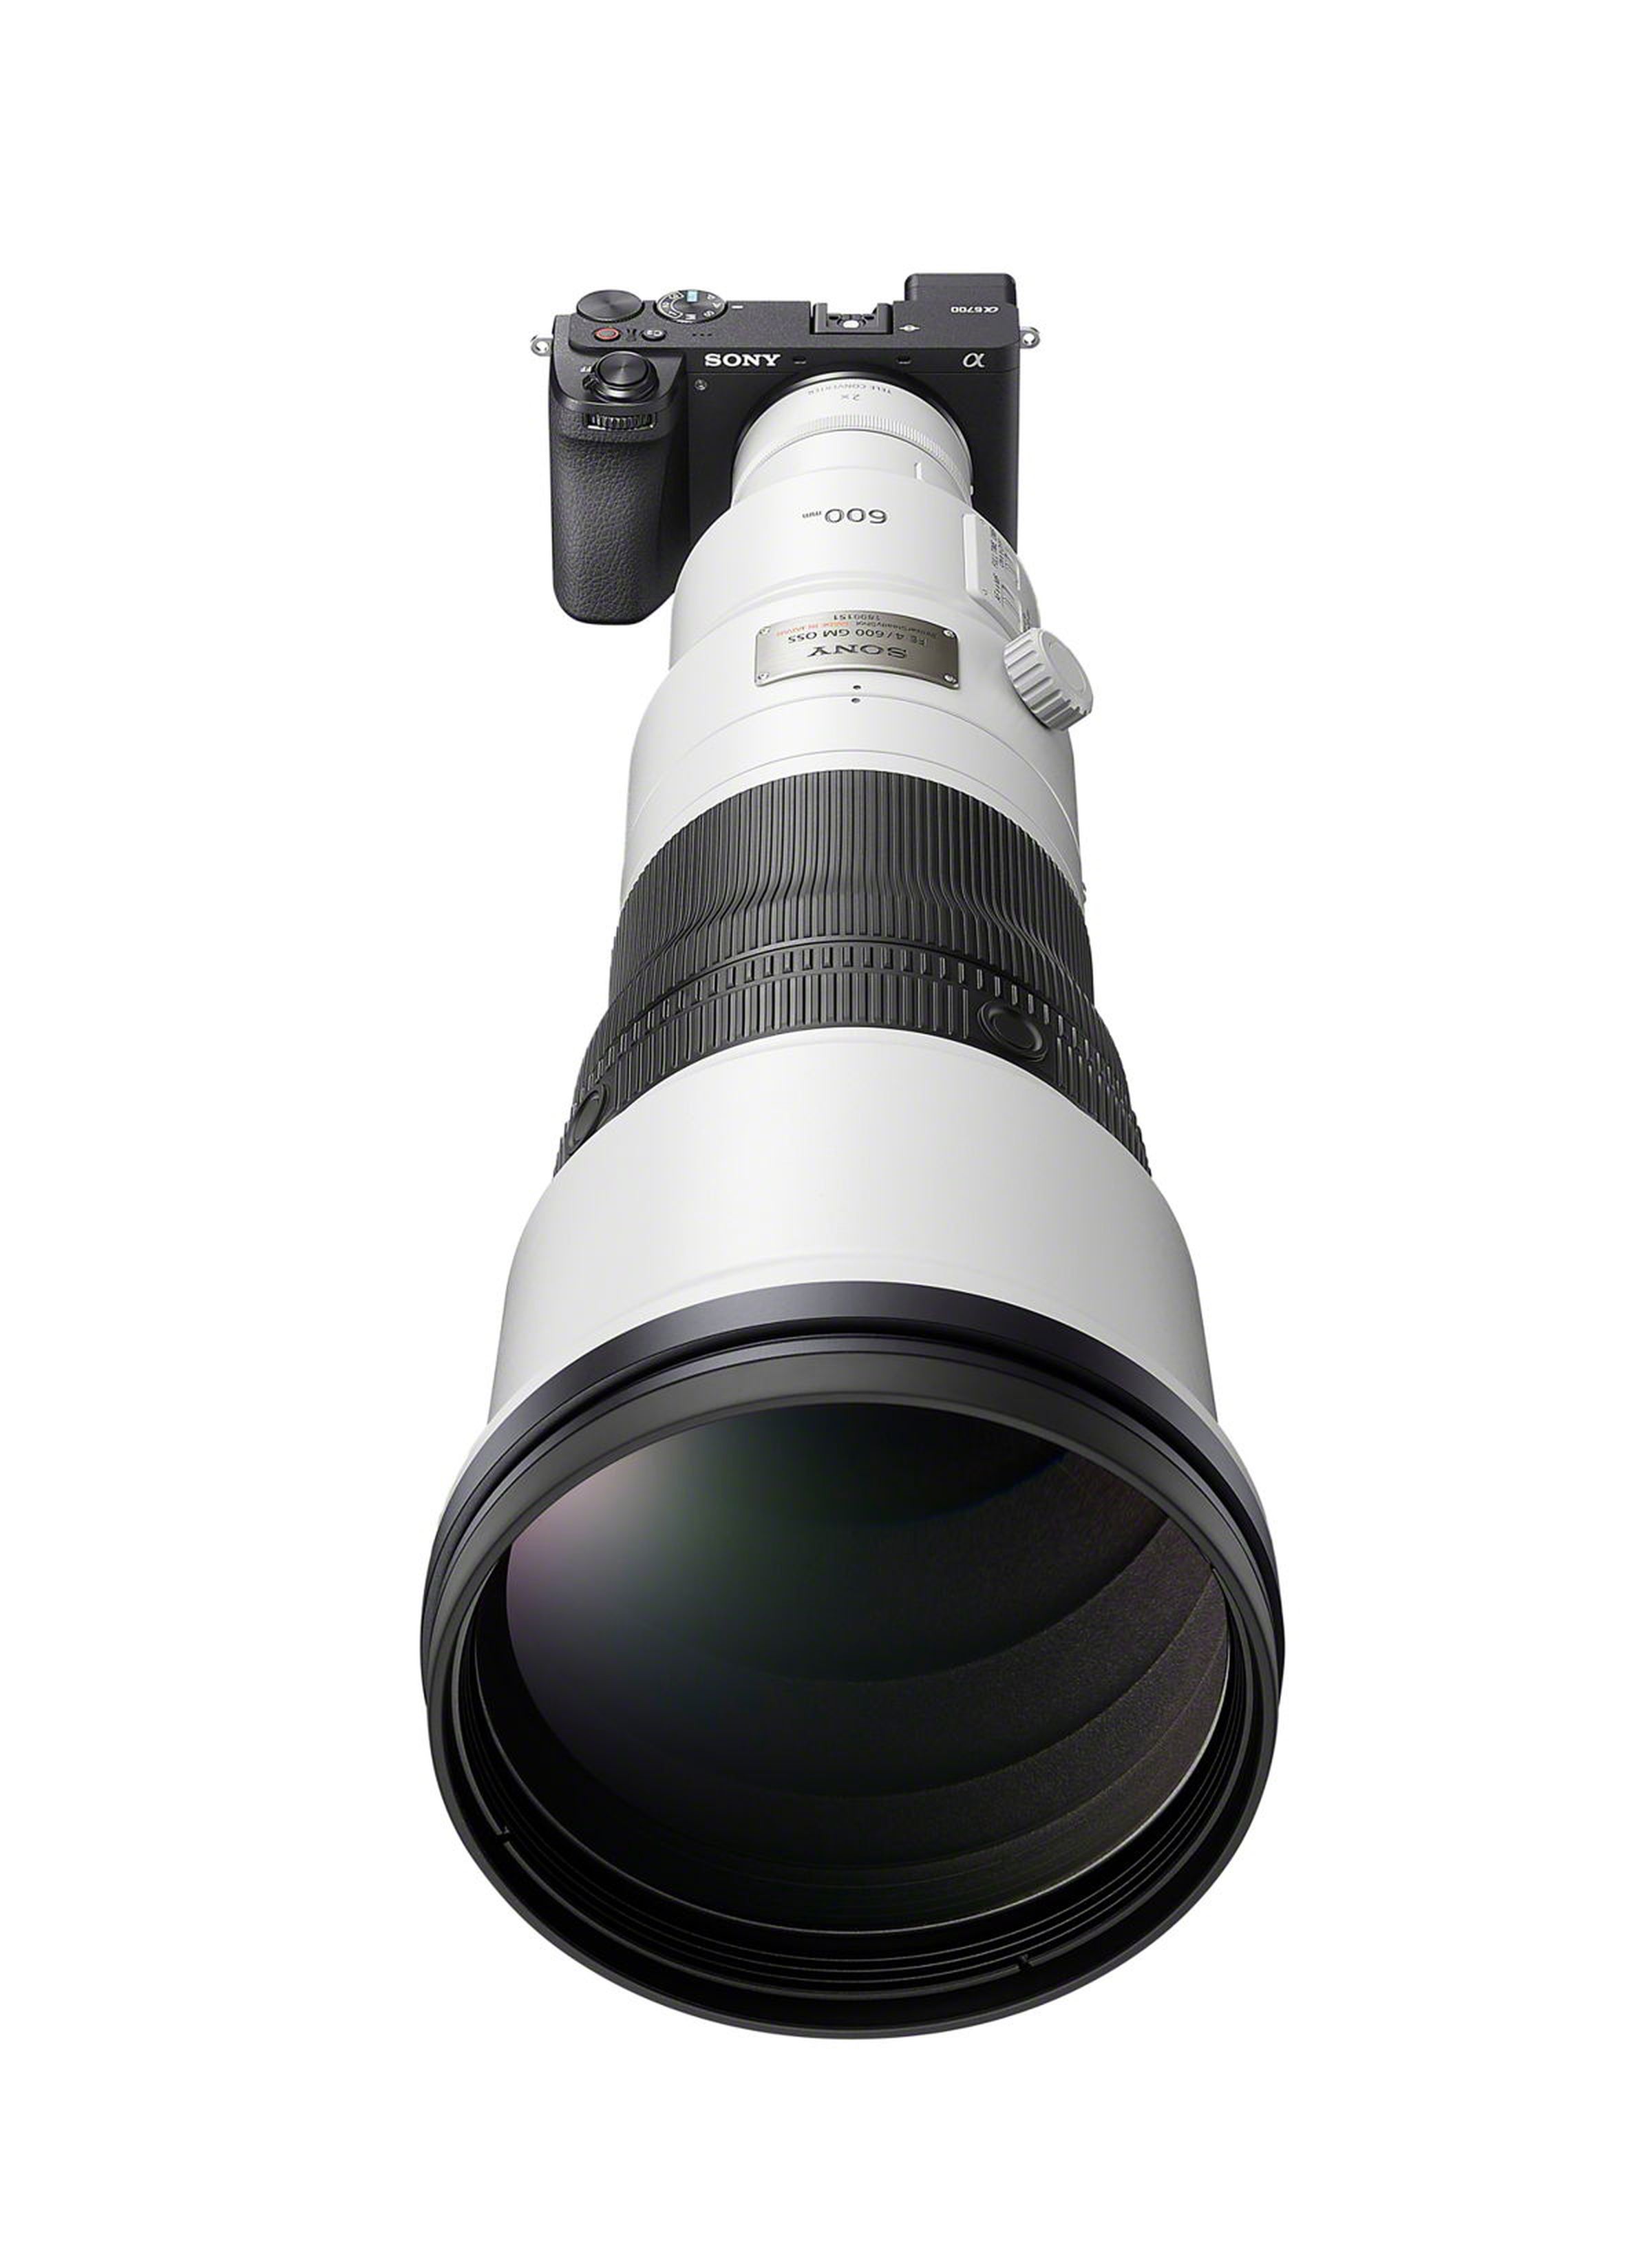 Front view showing the camera with a long zoom lens.